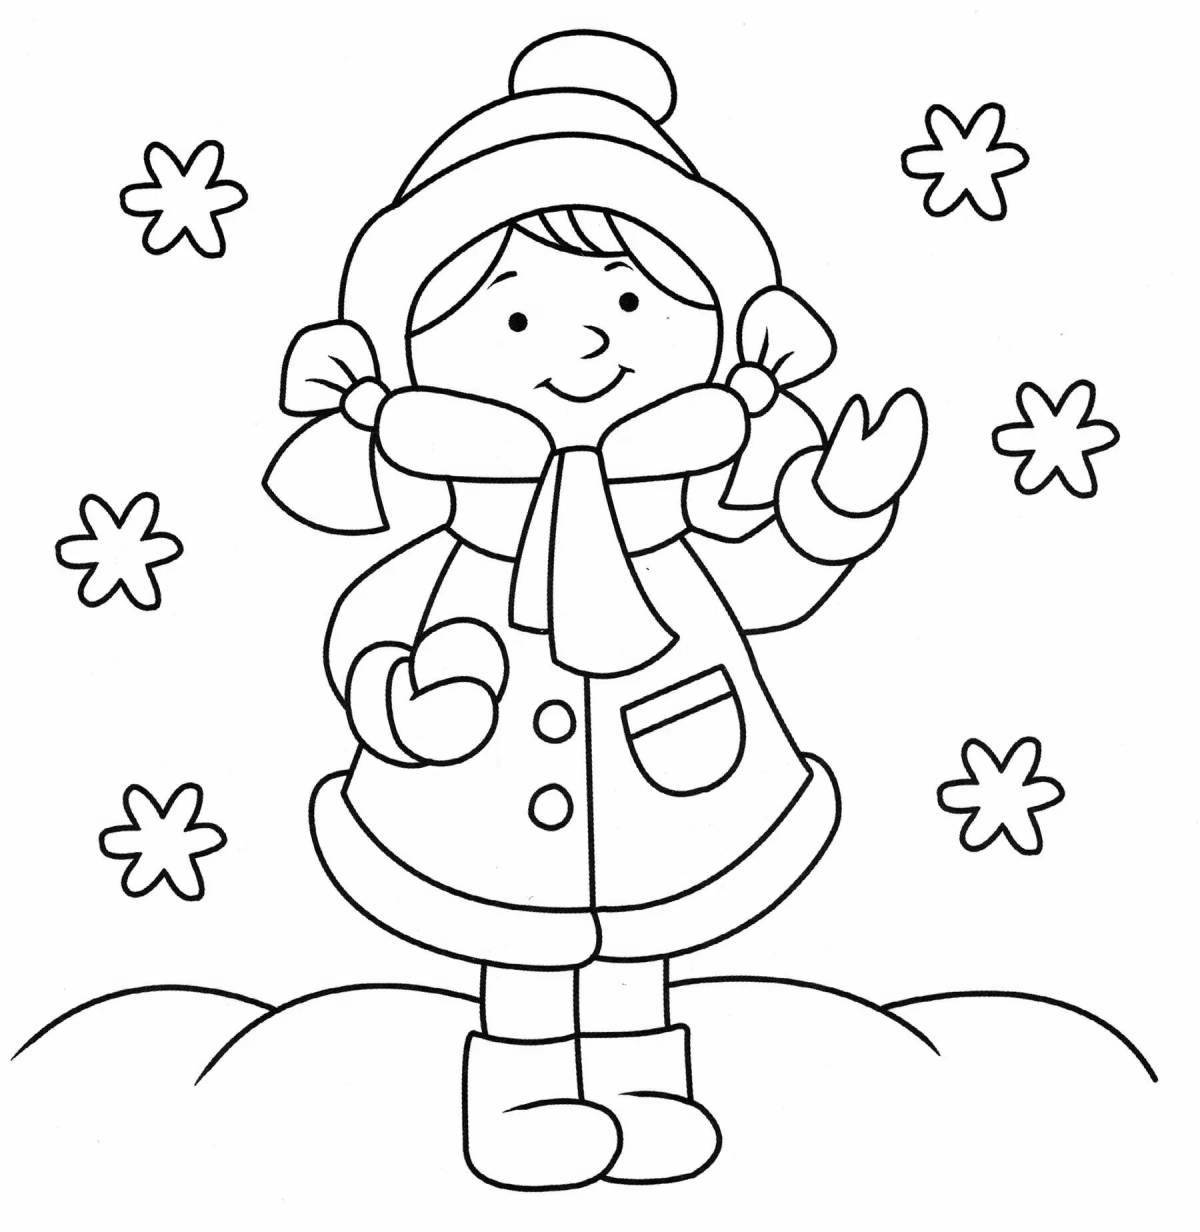 Great coloring book for kids boy in winter clothes